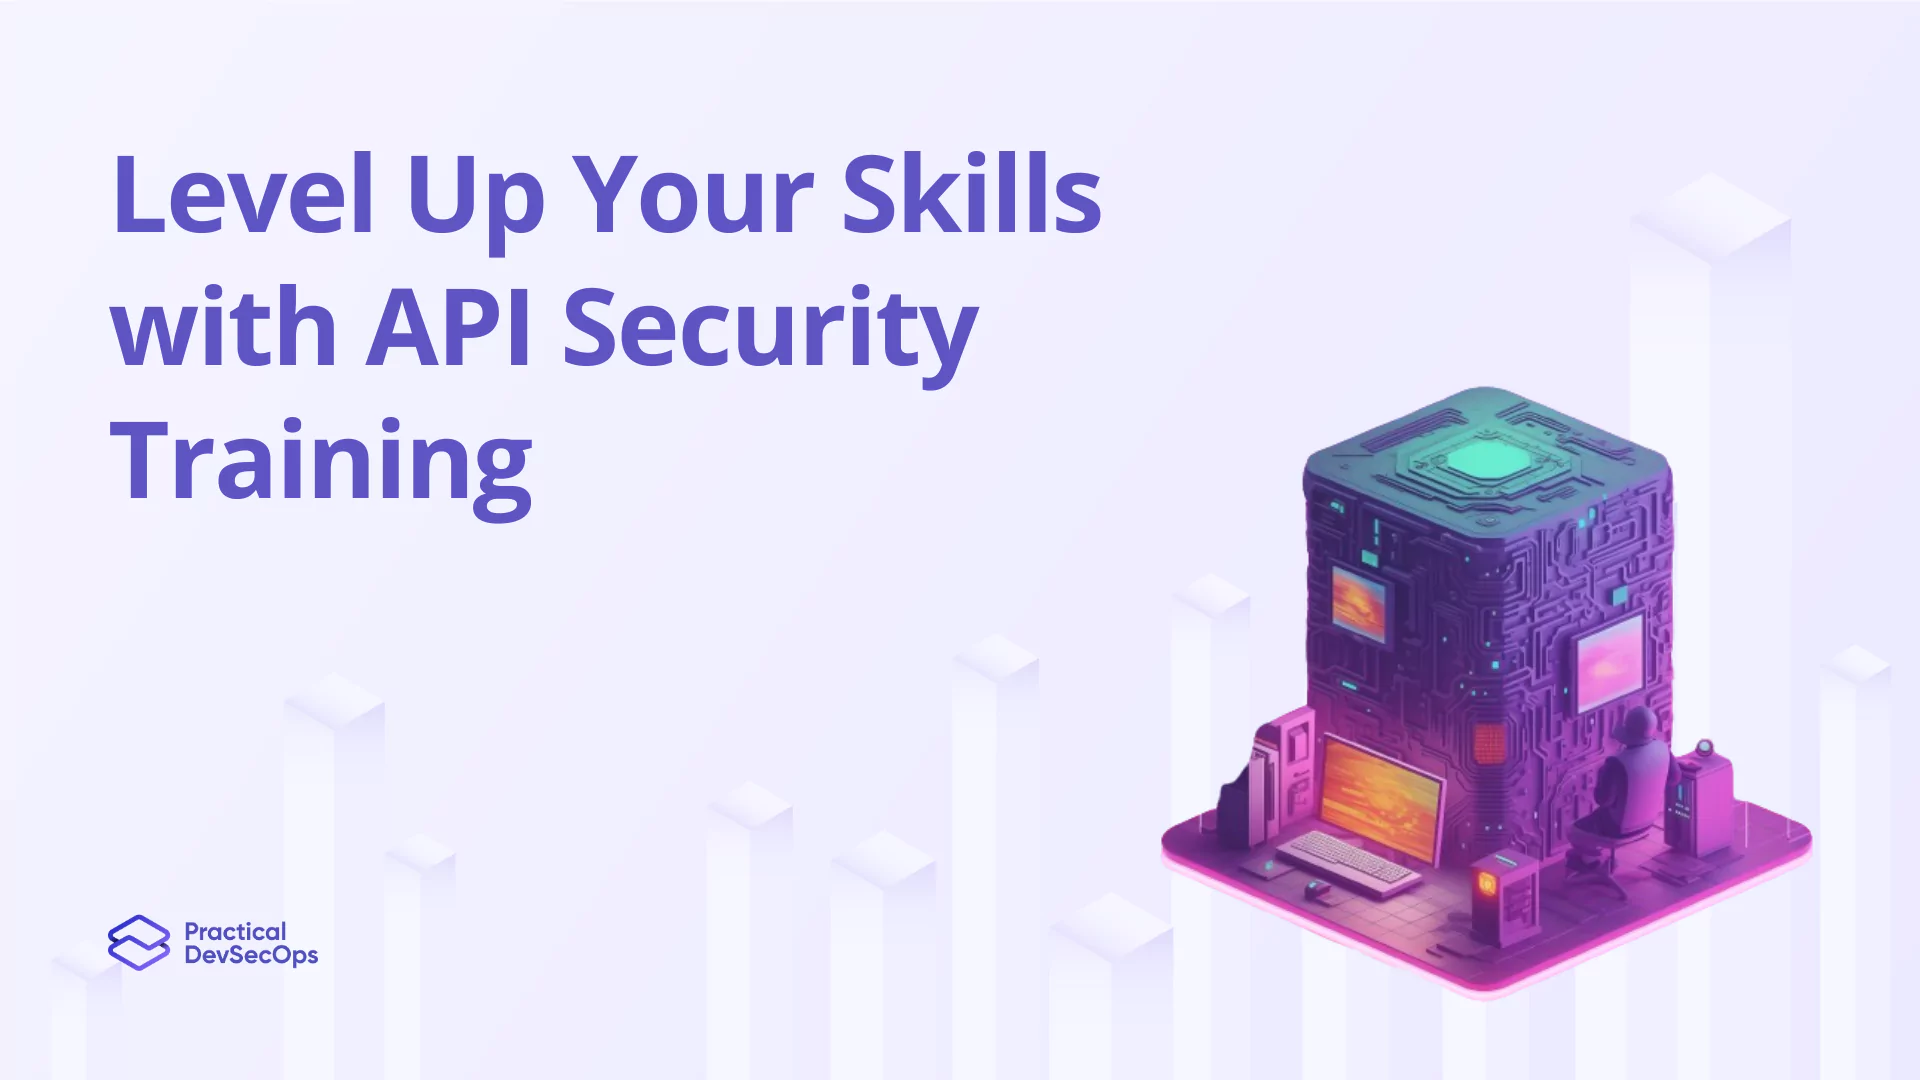 Level Up Your Skills with API Security Training